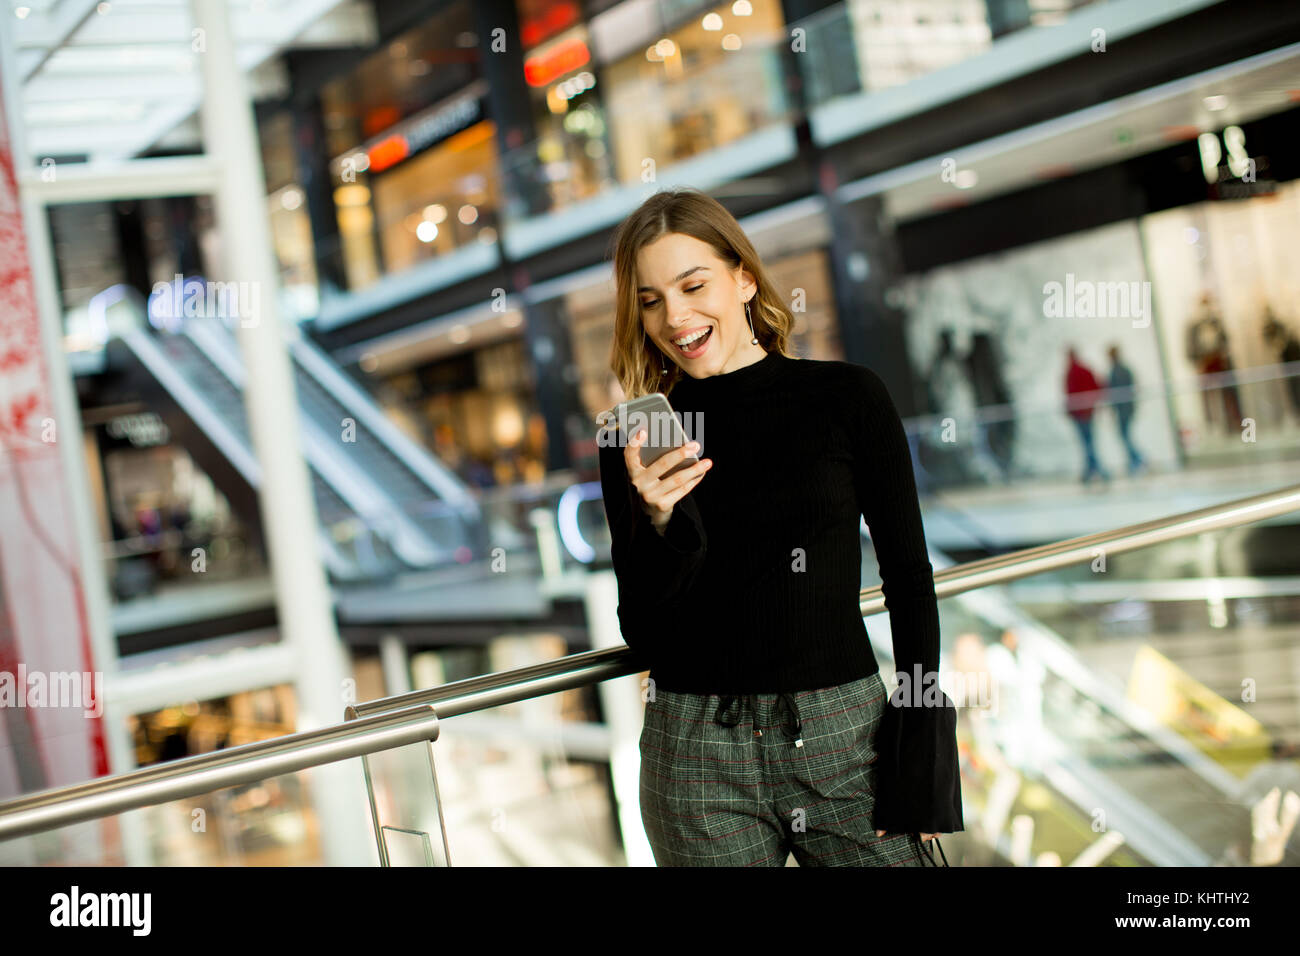 Portrait of lovely young woman looking on mobile phone in shopping center Stock Photo